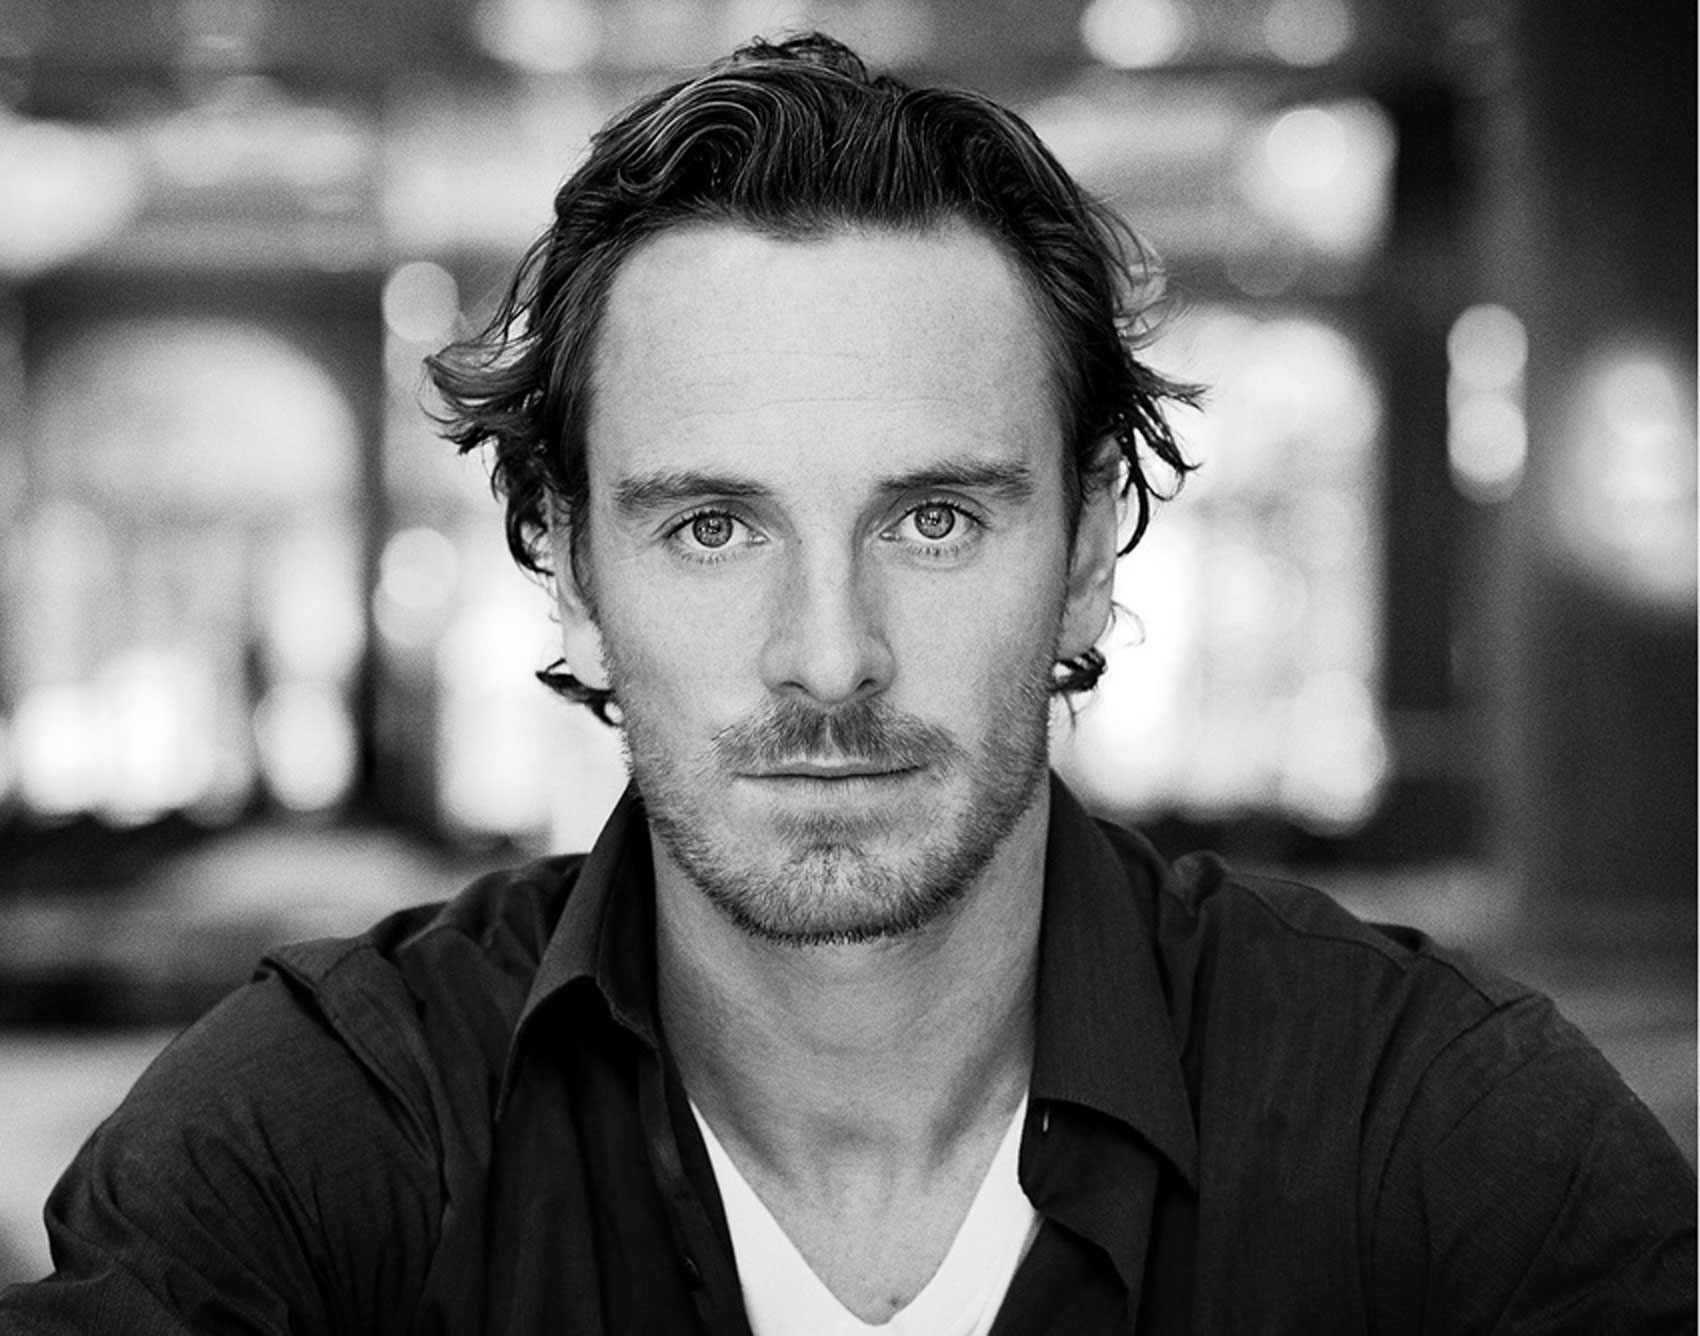 michael-michael-fassbender-28620024-1700-1336-michael-fassbender-may-replace-christian-bale-in-steve-jobs-role.jpeg